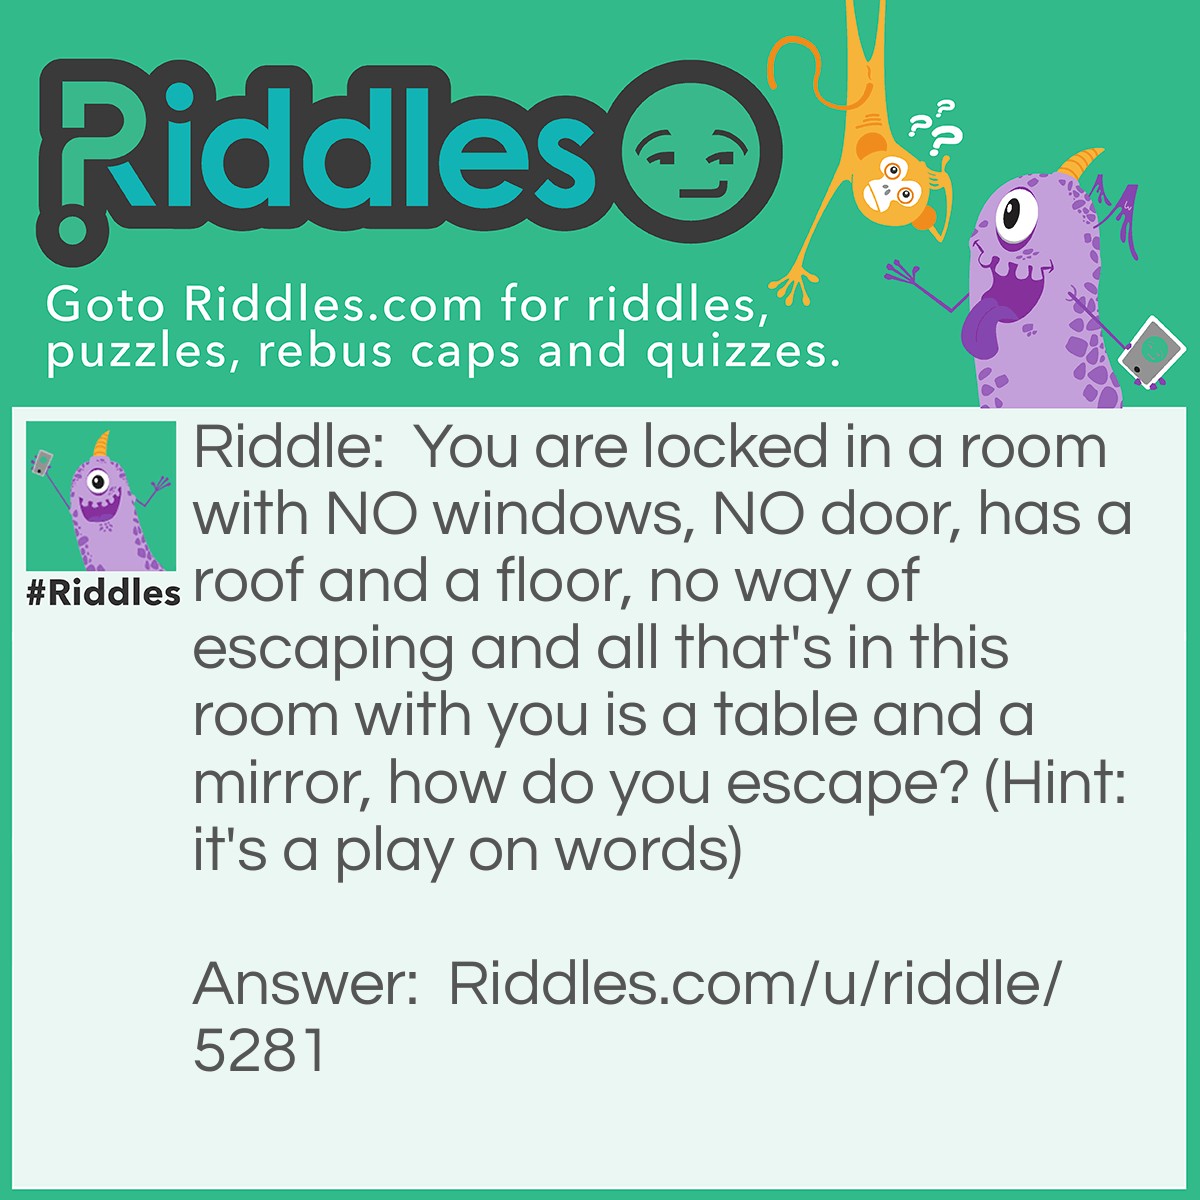 Riddle: You are locked in a room with NO windows, NO door, has a roof and a floor, no way of escaping and all that's in this room with you is a table and a mirror, how do you escape? (Hint: it's a play on words) Answer: There are two possible ways. 1. You break the mirror and with the shards you cut yourself and give yourself a sore/saw and with that sore/saw, you cut the table in half then you put the table back to a whole/hole and with that whole/hole you climb out! 2. You saw the table with the mirror (cut in half, you sawed it in half) and with the two table halves you put it back to a whole/hole and with that whole/hole, you climb out!